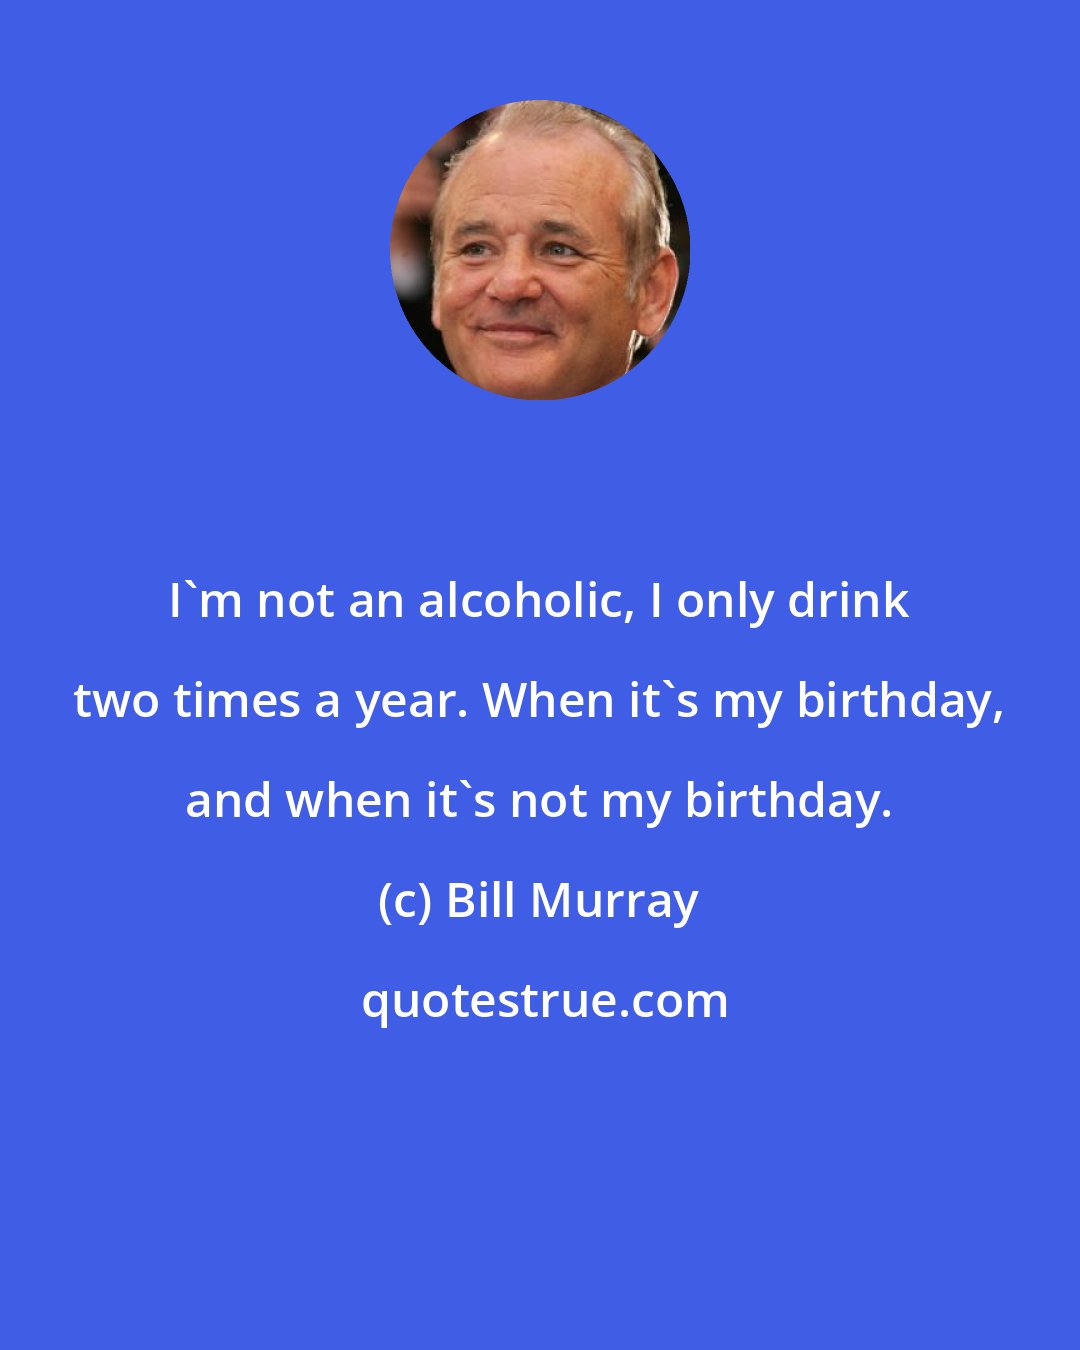 Bill Murray: I'm not an alcoholic, I only drink two times a year. When it's my birthday, and when it's not my birthday.